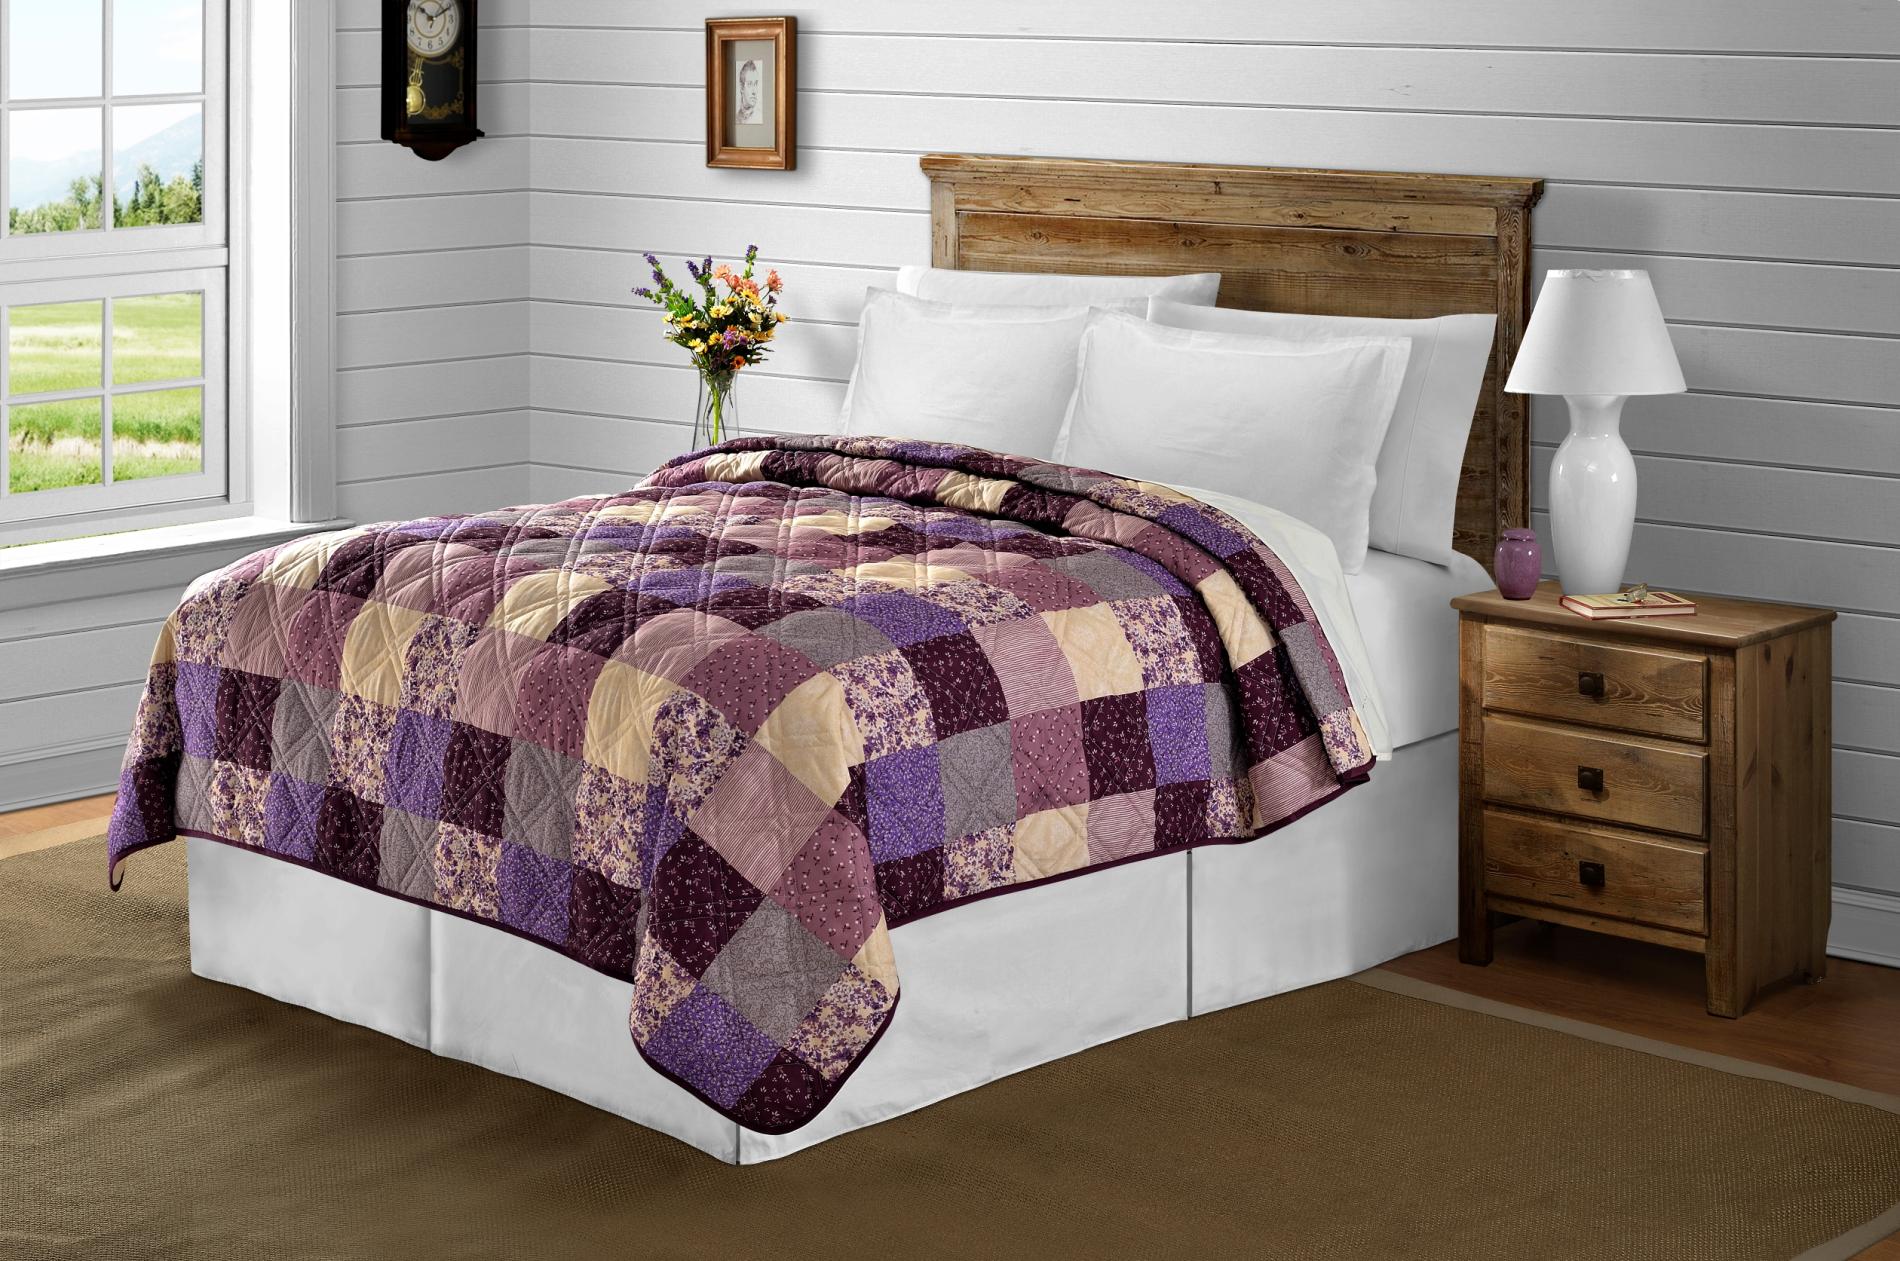 Kearny Quilt - Patchwork